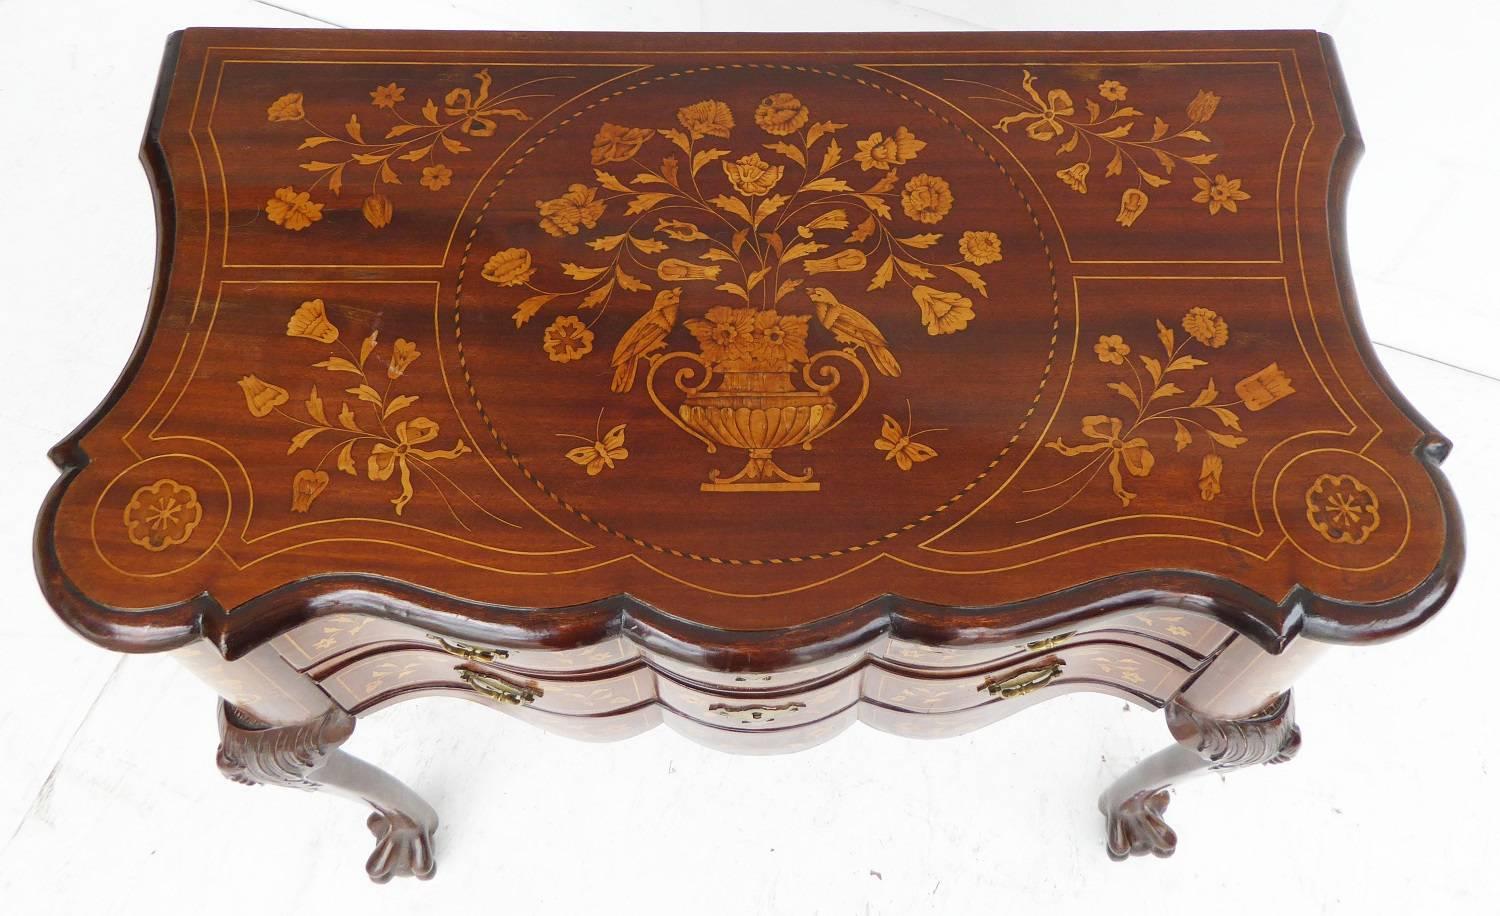 For sale is a 19th century Dutch marquetry chest. The chest has an ornately inlaid top above two serpentine drawers, all with matching marquetry inlays. The chest stands on carved cabriole legs terminating on claw and ball feet. This piece is in